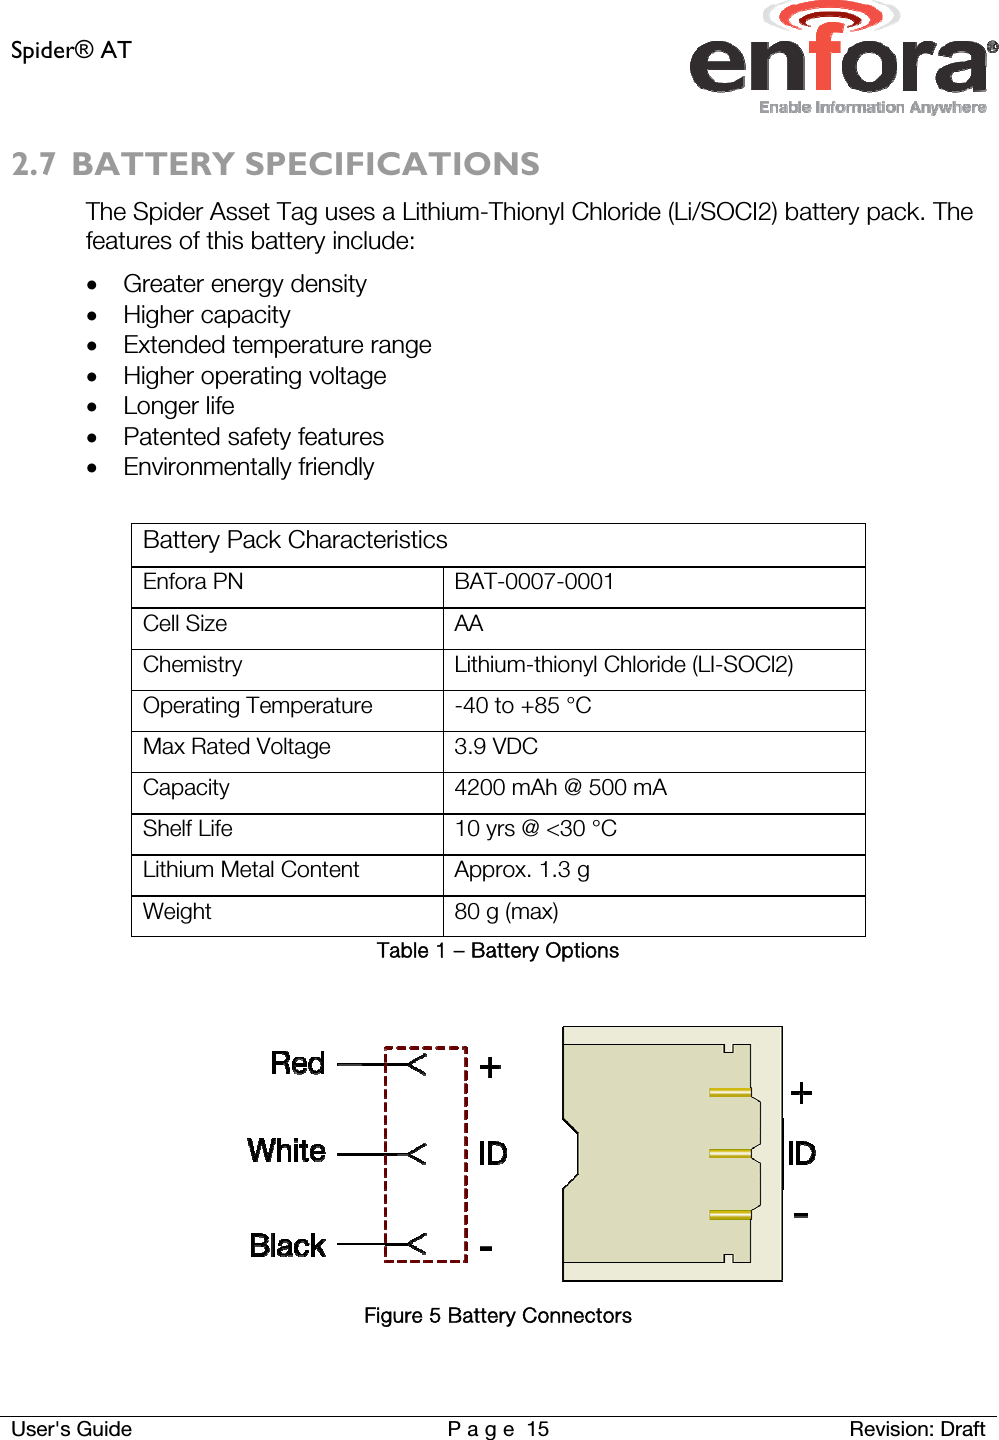 Spider® AT     User&apos;s Guide  P a g e 15 Revision: Draft 2.7 BATTERY SPECIFICATIONS The Spider Asset Tag uses a Lithium-Thionyl Chloride (Li/SOCI2) battery pack. The features of this battery include:  Greater energy density  Higher capacity  Extended temperature range  Higher operating voltage  Longer life  Patented safety features  Environmentally friendly  Battery Pack Characteristics Enfora PN  BAT-0007-0001 Cell Size  AA Chemistry  Lithium-thionyl Chloride (LI-SOCl2) Operating Temperature  -40 to +85 °C Max Rated Voltage  3.9 VDC Capacity  4200 mAh @ 500 mA Shelf Life  10 yrs @ &lt;30 °C Lithium Metal Content  Approx. 1.3 g Weight  80 g (max) Table 1 – Battery Options    Figure 5 Battery Connectors   